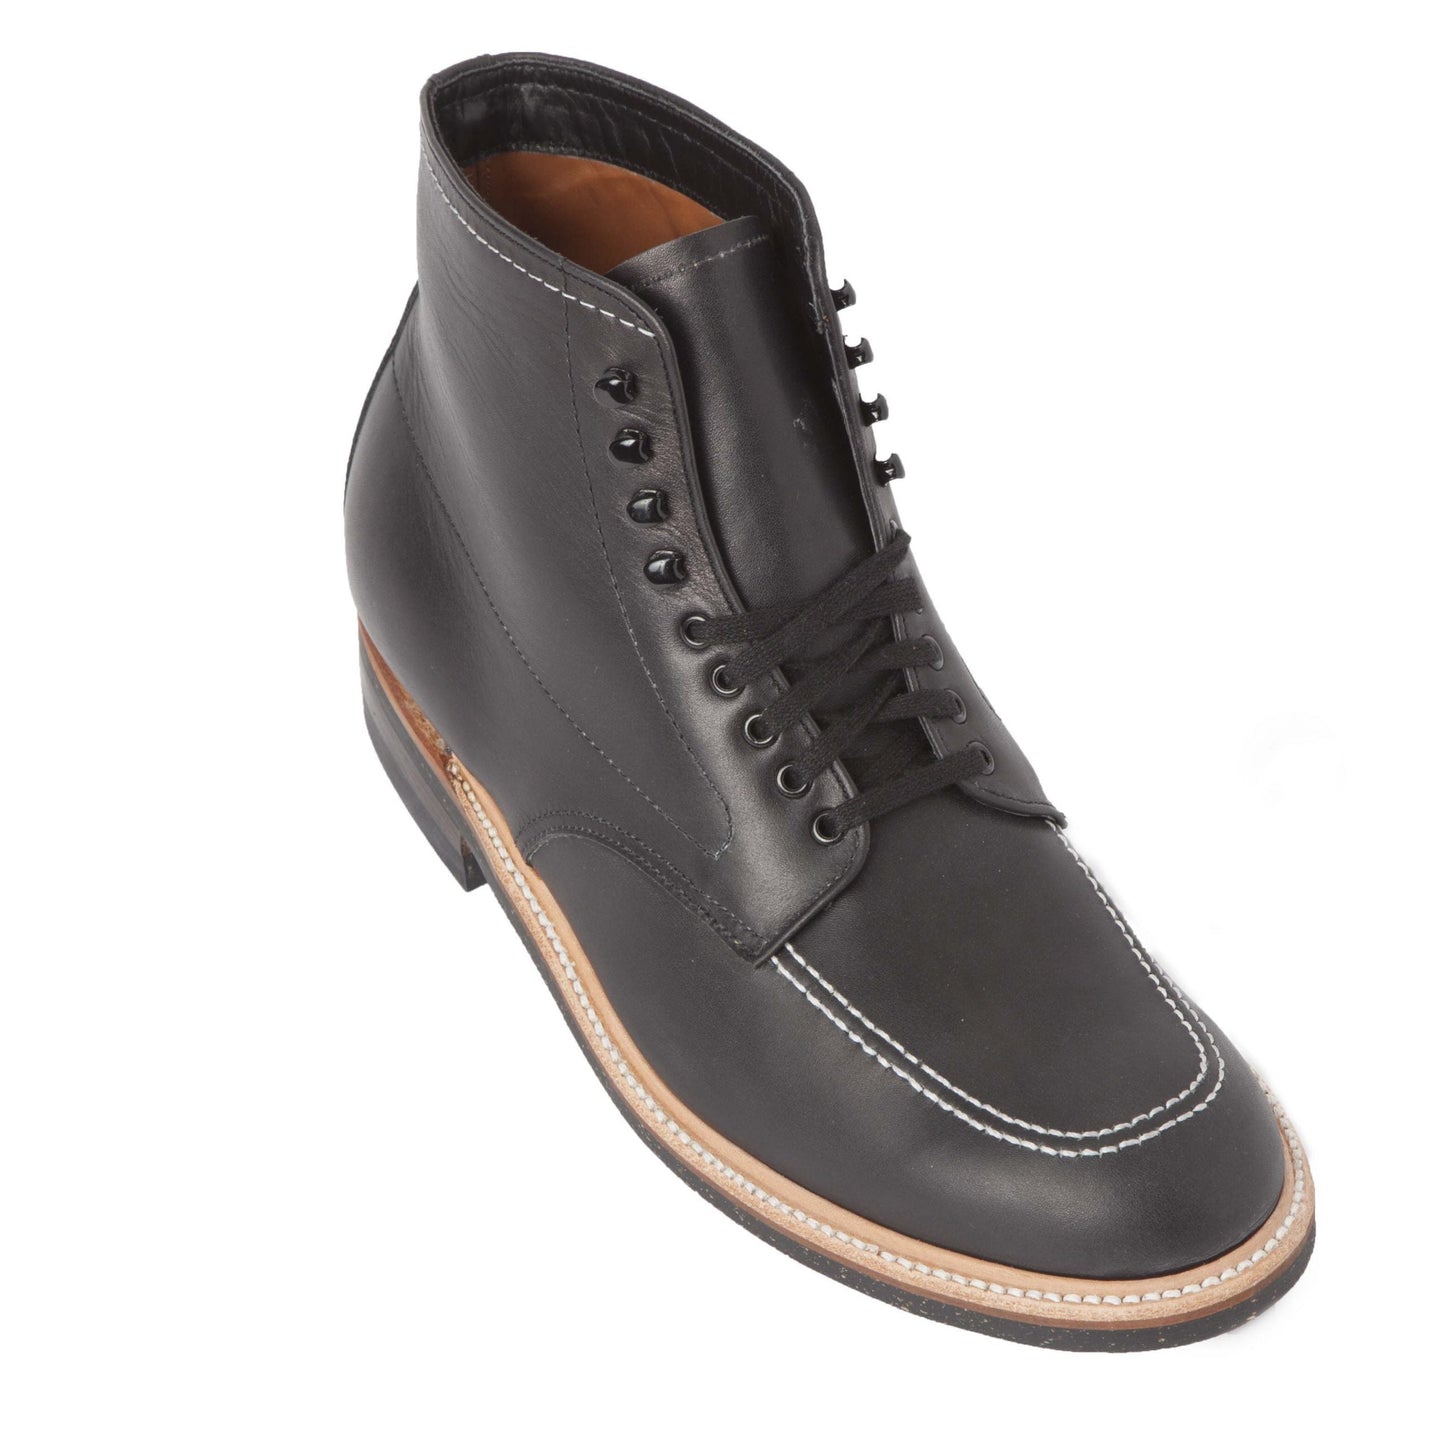 401 - Indy Boot in Black Chromexcel is